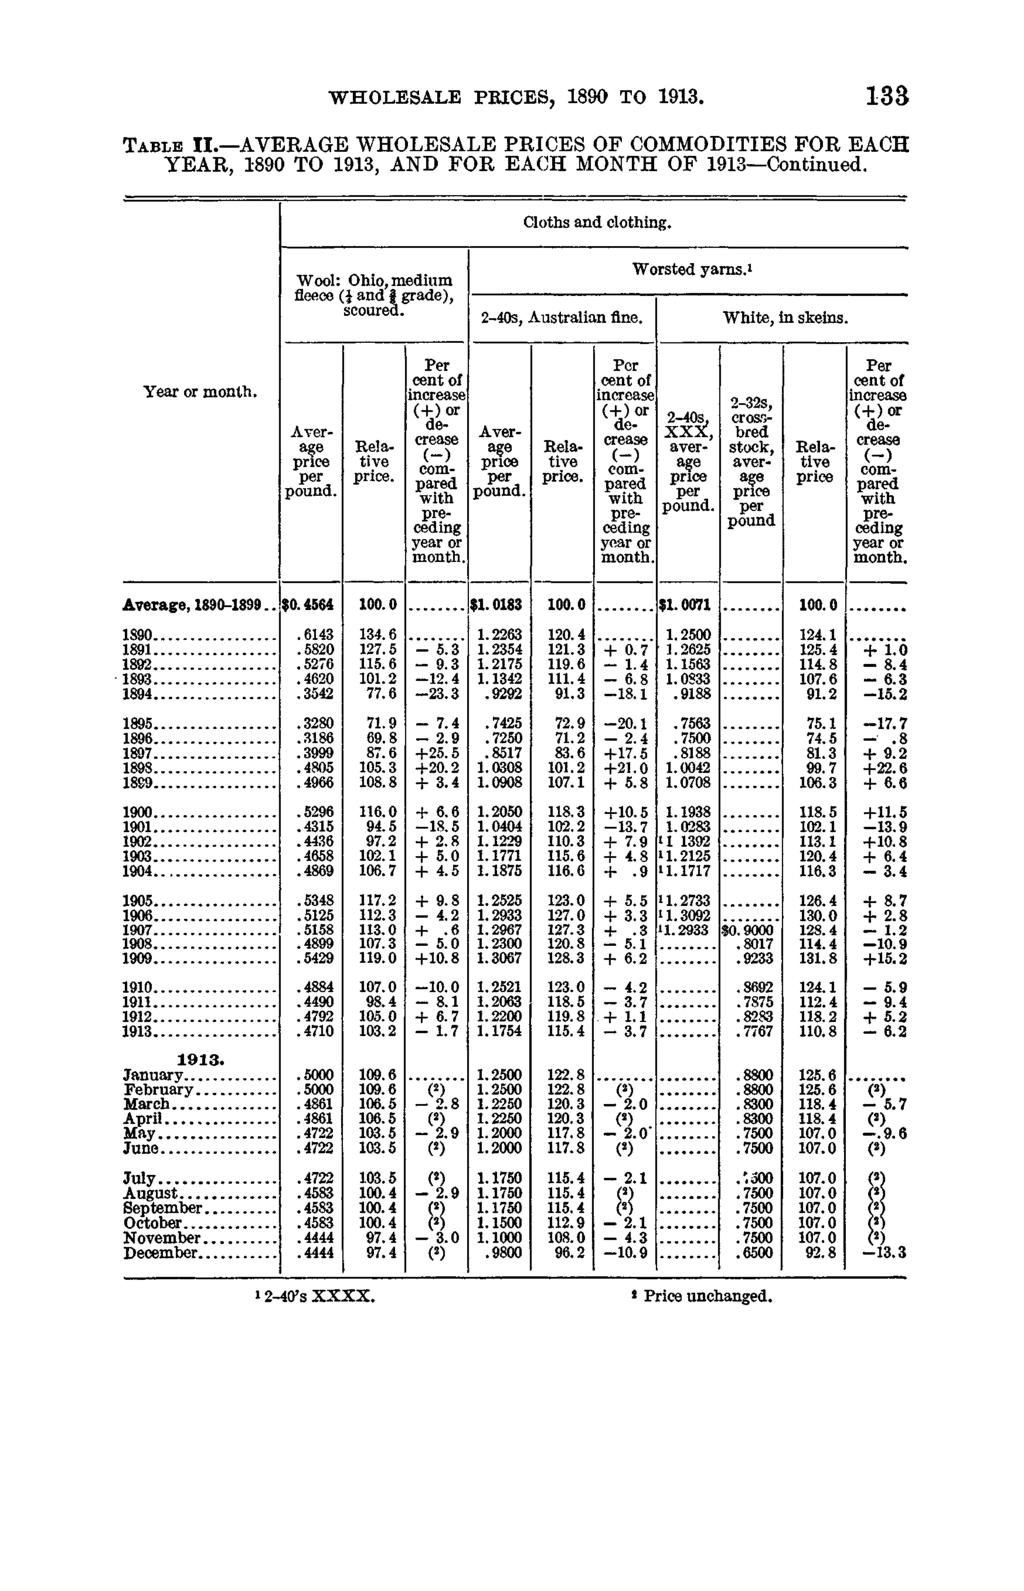 WHOLESALE PRICES, 1890 TO 1913. 133 T ab le I I. AVERAGE WHOLESALE PRICES OF COMMODITIES FOR EACH YEAR, 1890 TO 1913, AND FOR EACH MONTH OF 1913 Continued. Cloths and clothing.